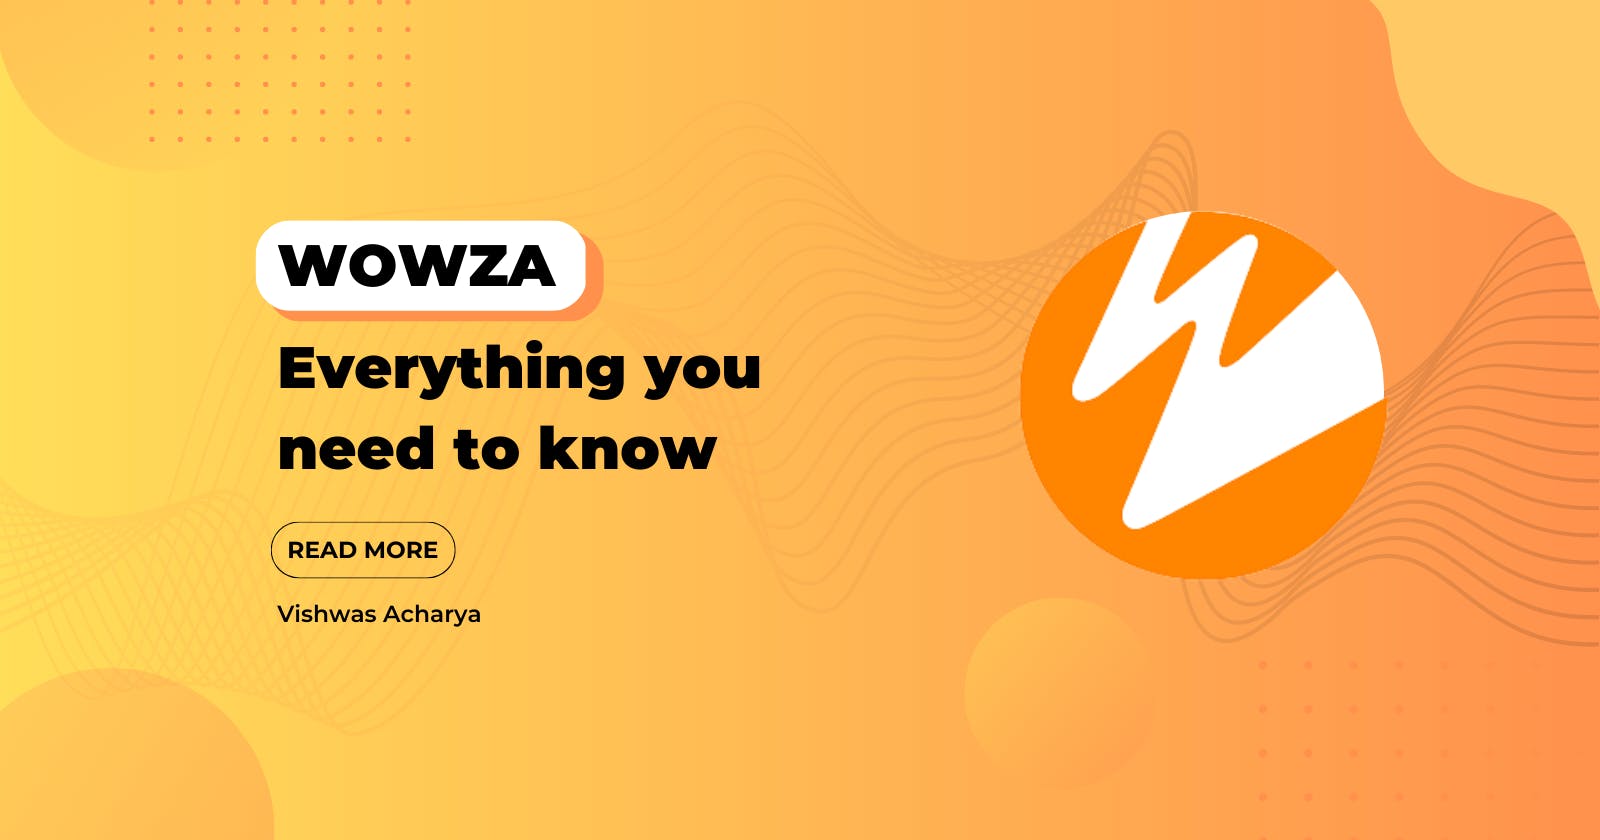 Wowza: Everything you need to know